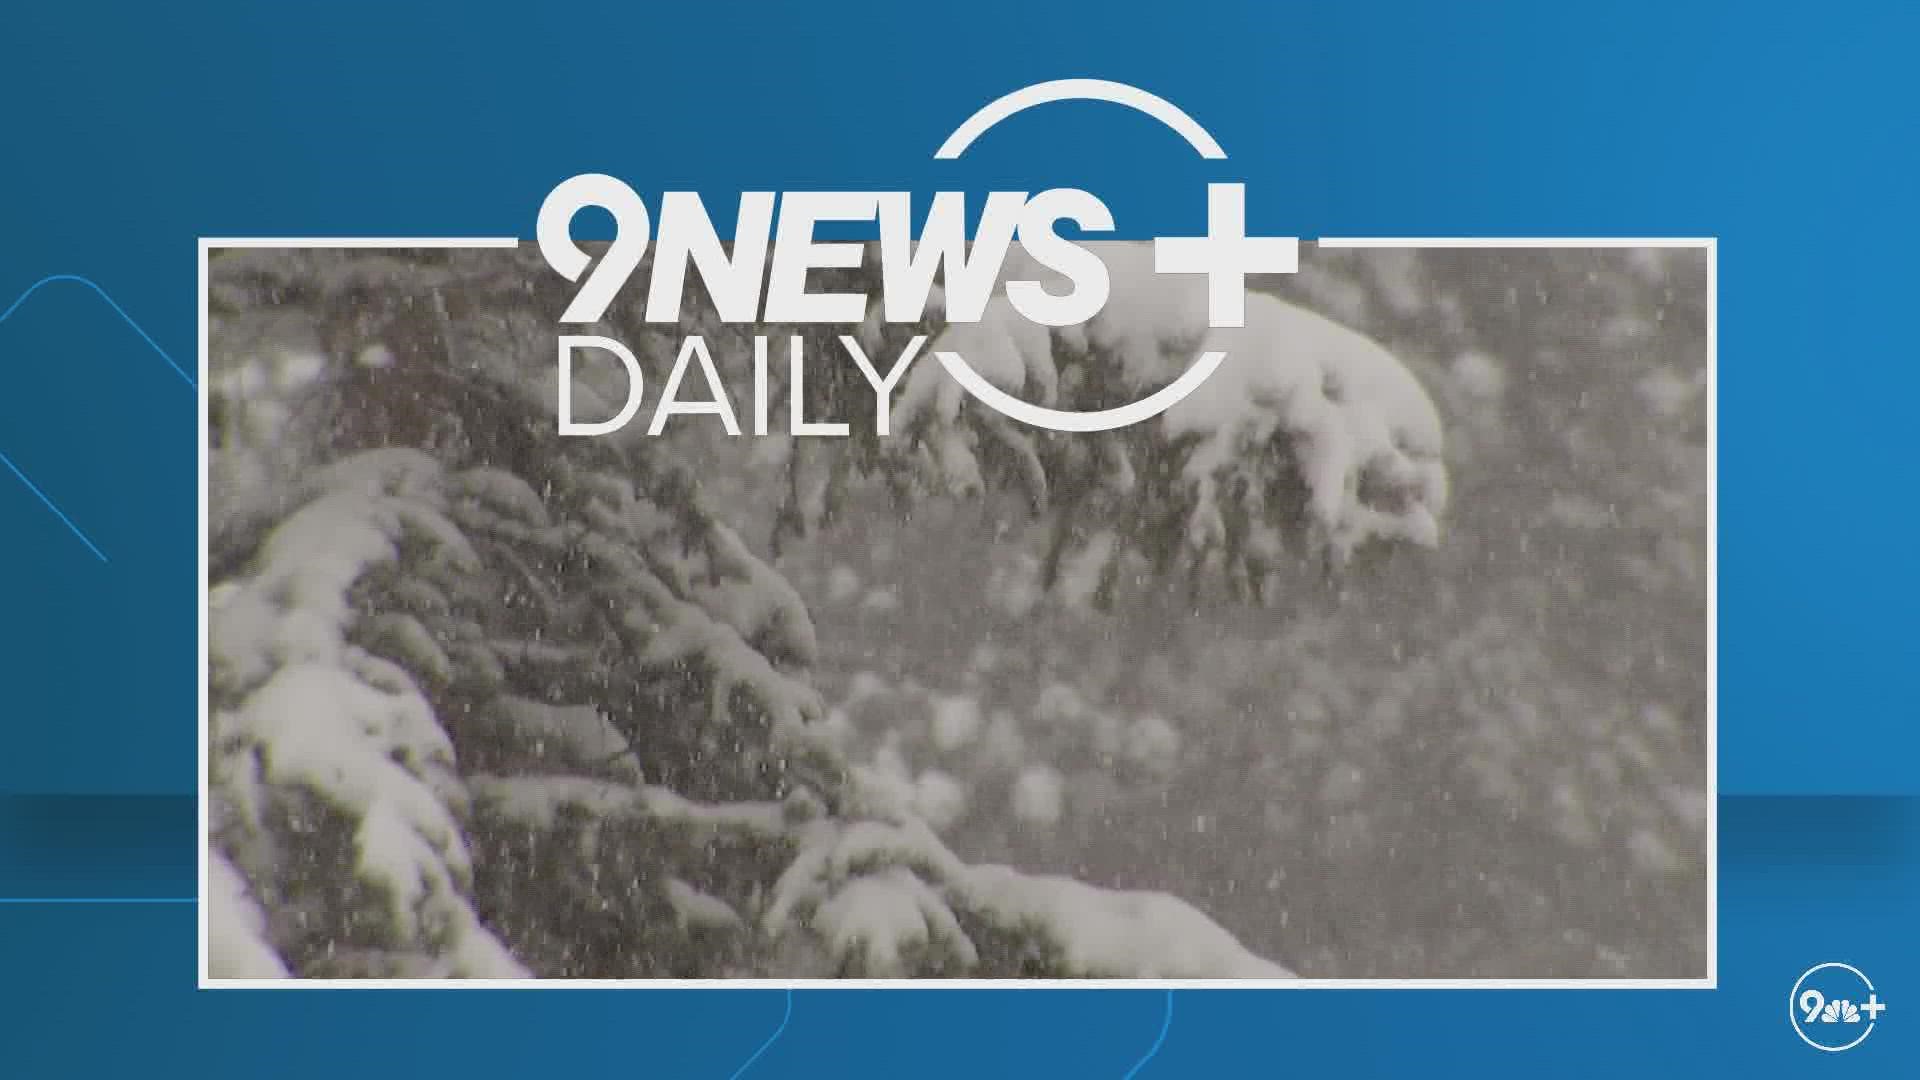 Denver just had its coldest meteorological winter since 2010. Meteorologist Chris Bianchi recaps our chilly winter and what that could mean heading into spring.